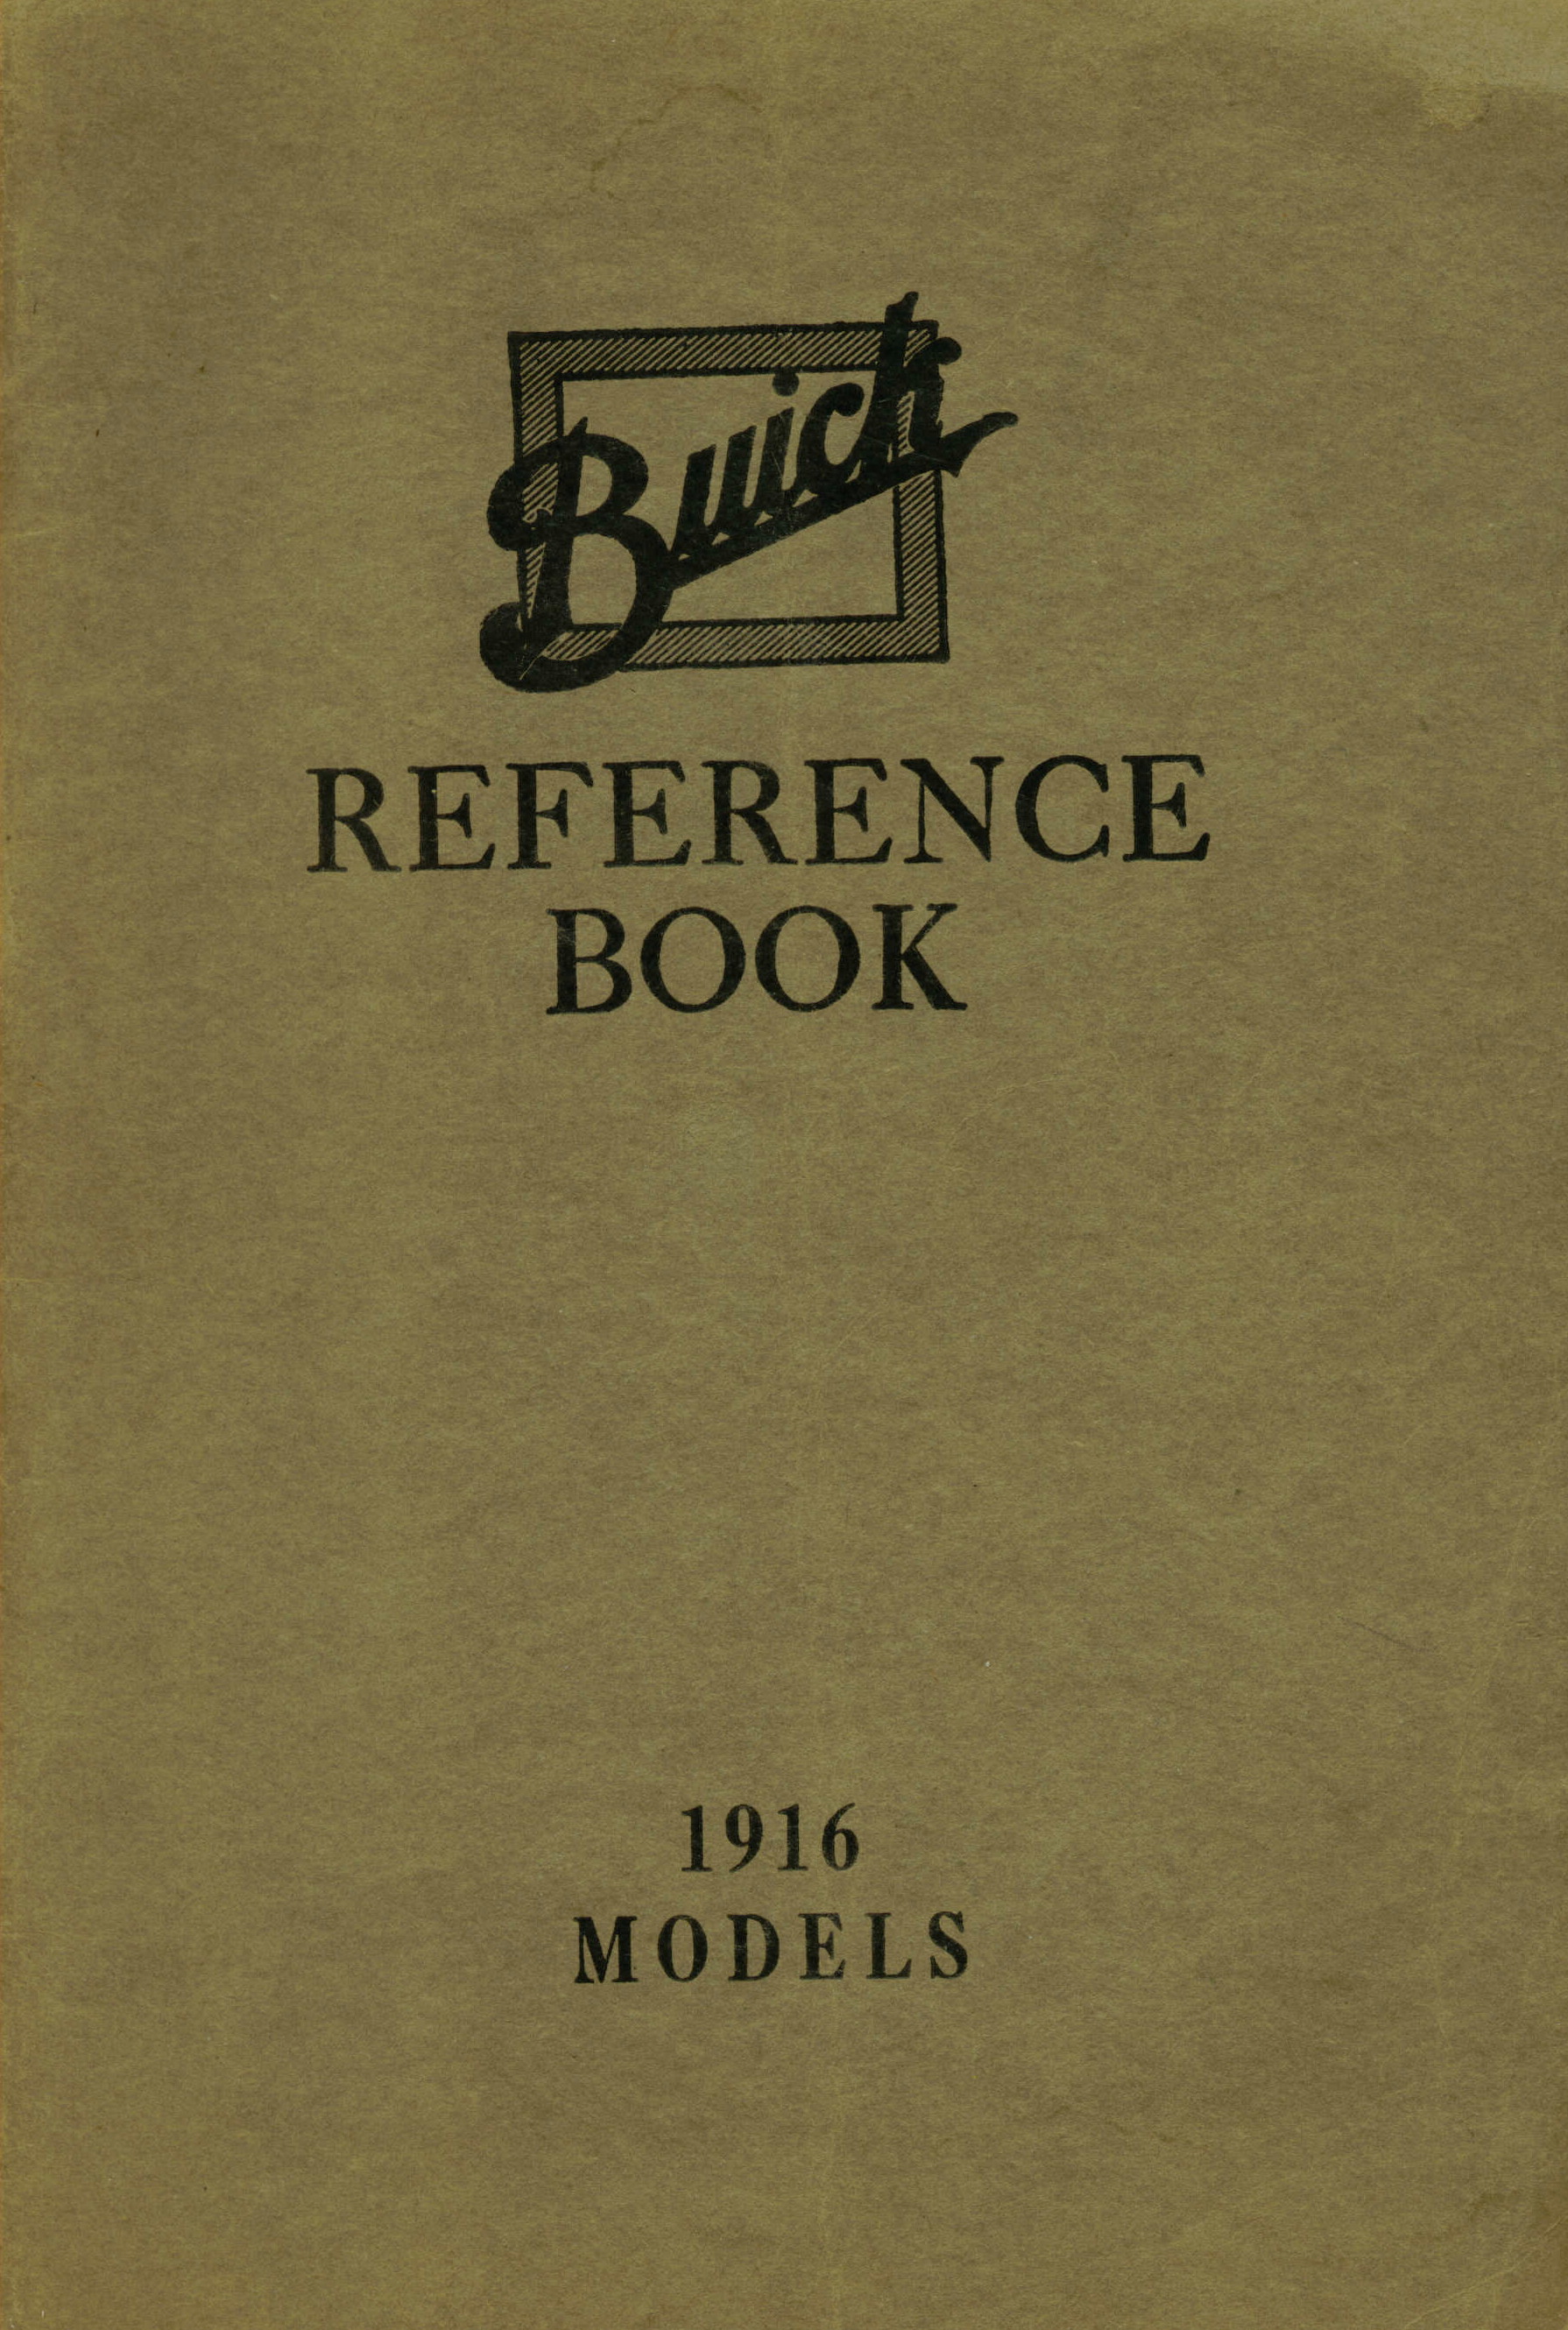 1916 Buick Reference Book-00